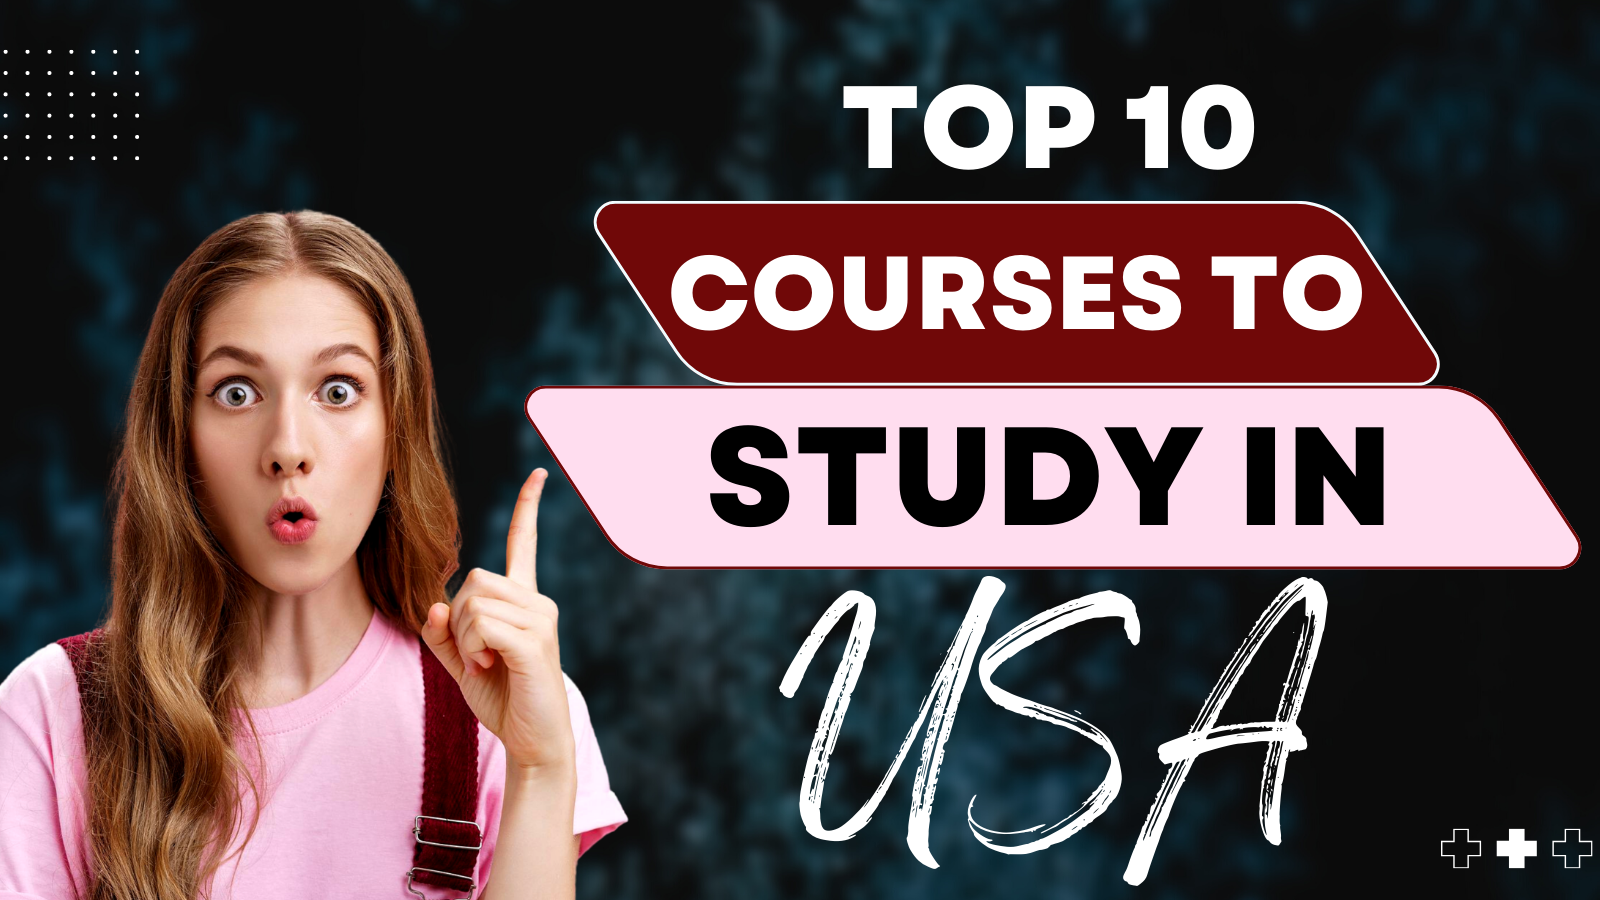 advantages and disadvantages of education system in usa,basic education system in usa,best education system in the us,best education system in the us by state,
                         best education system in us state,